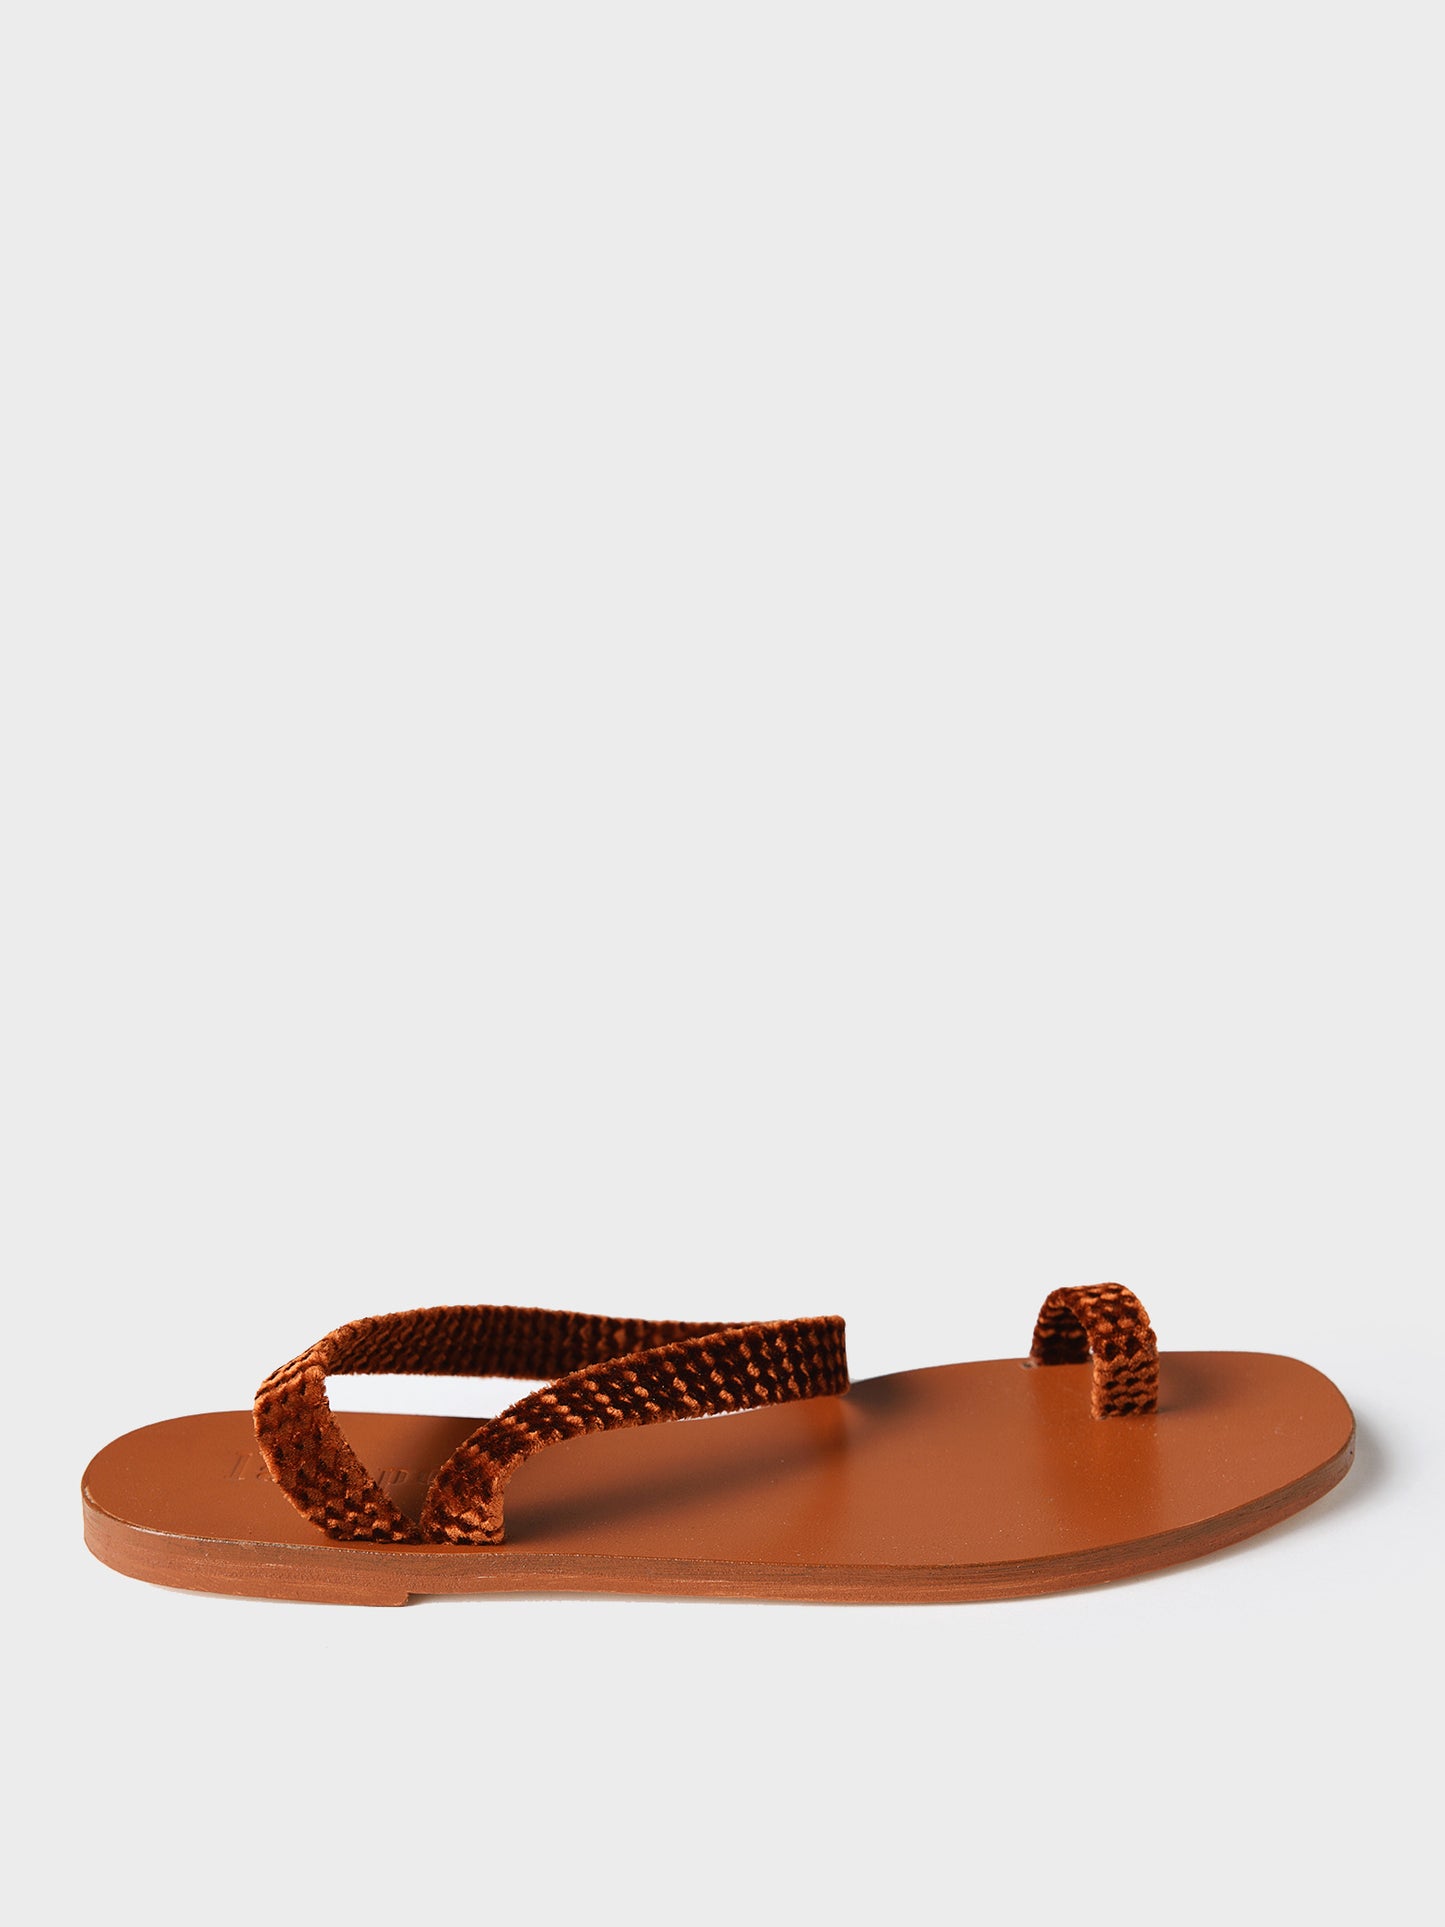 Lanapo Vell St. 109 Cuoio Sandal